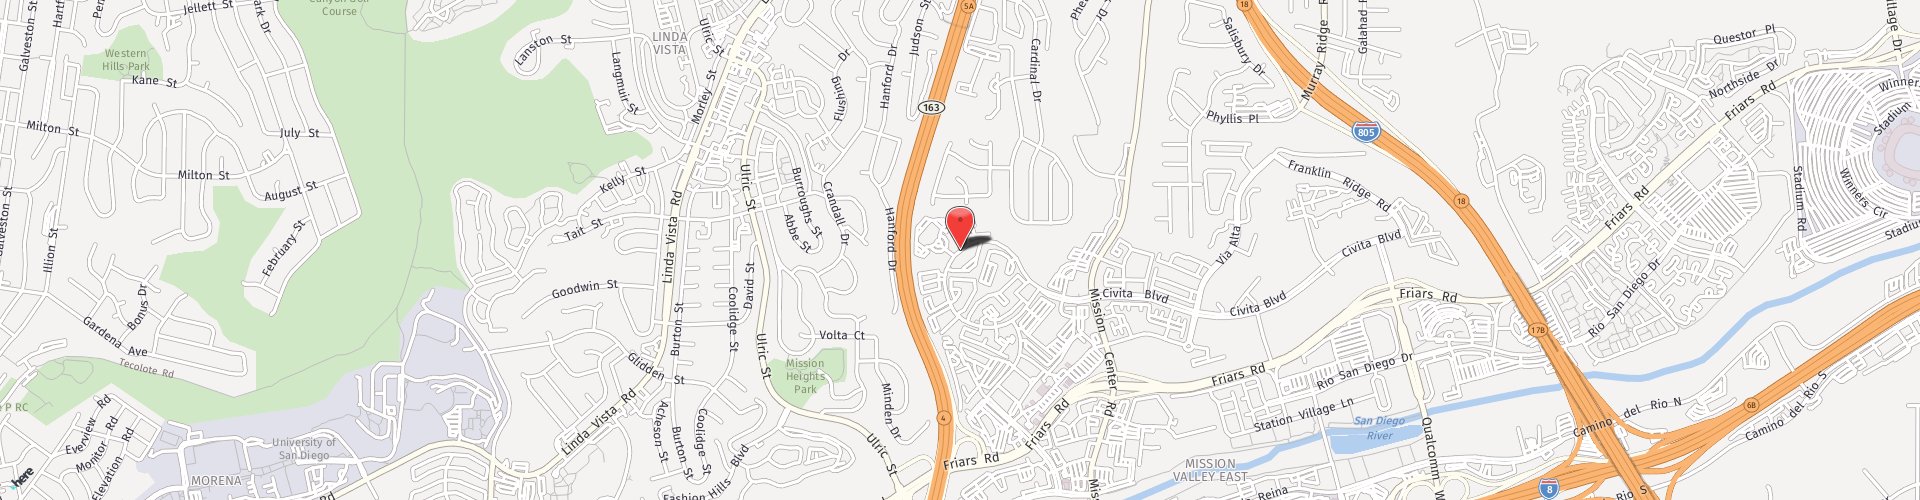 Location Map: 7485 Mission Valley Rd. San Diego, CA 92108